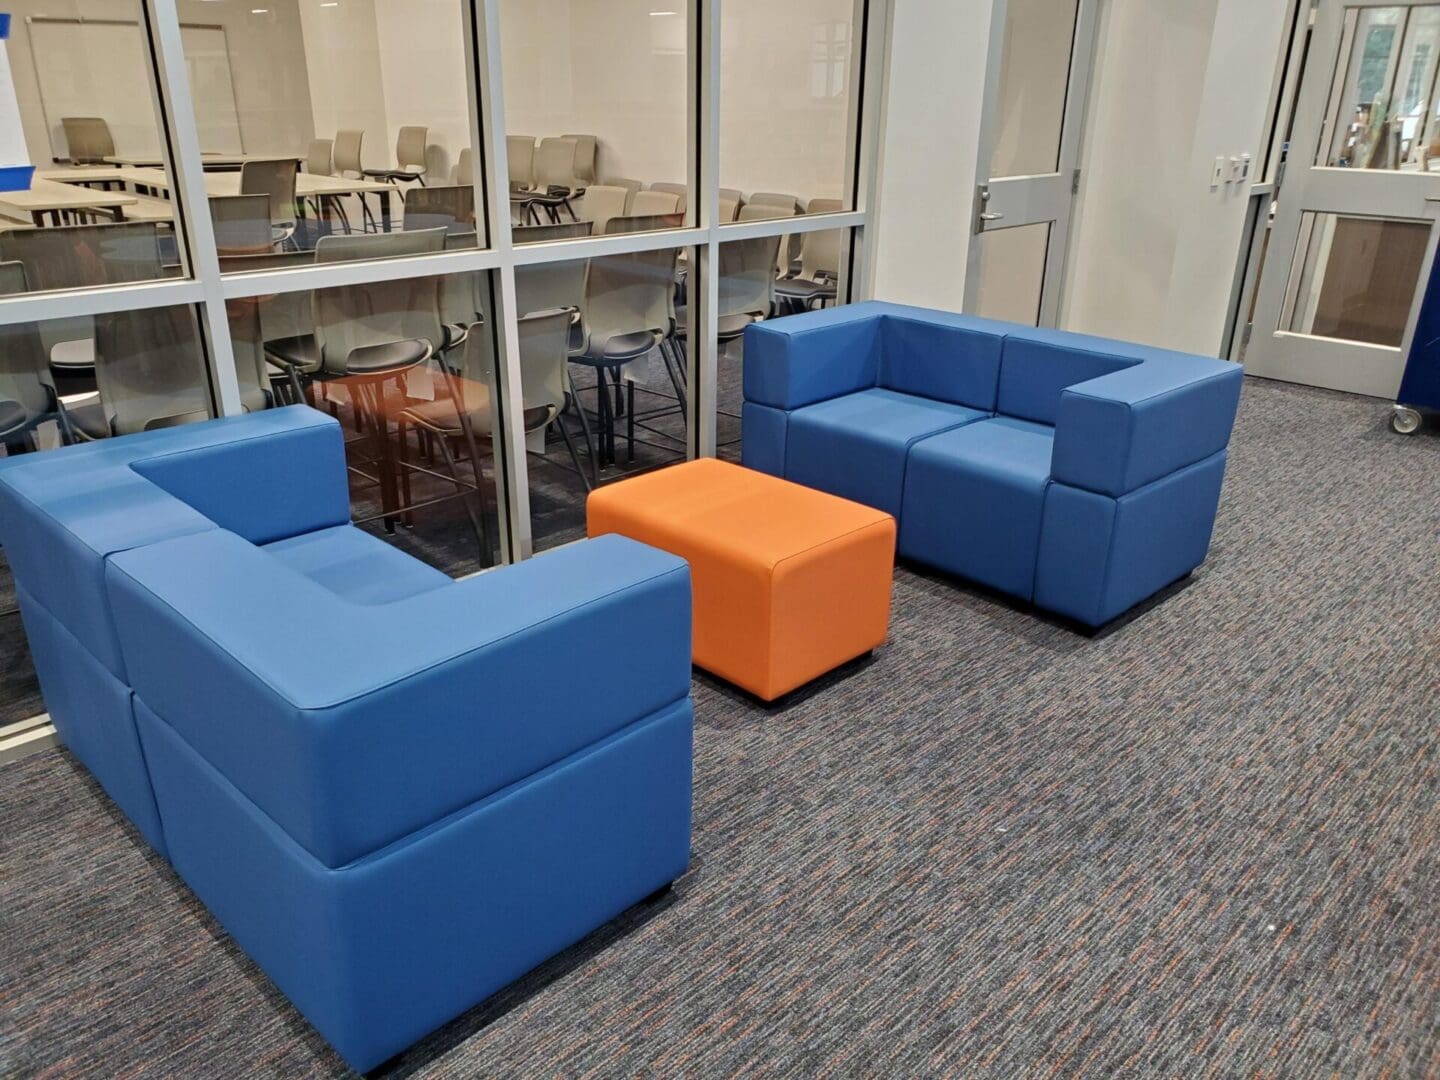 A room with blue and orange furniture in it